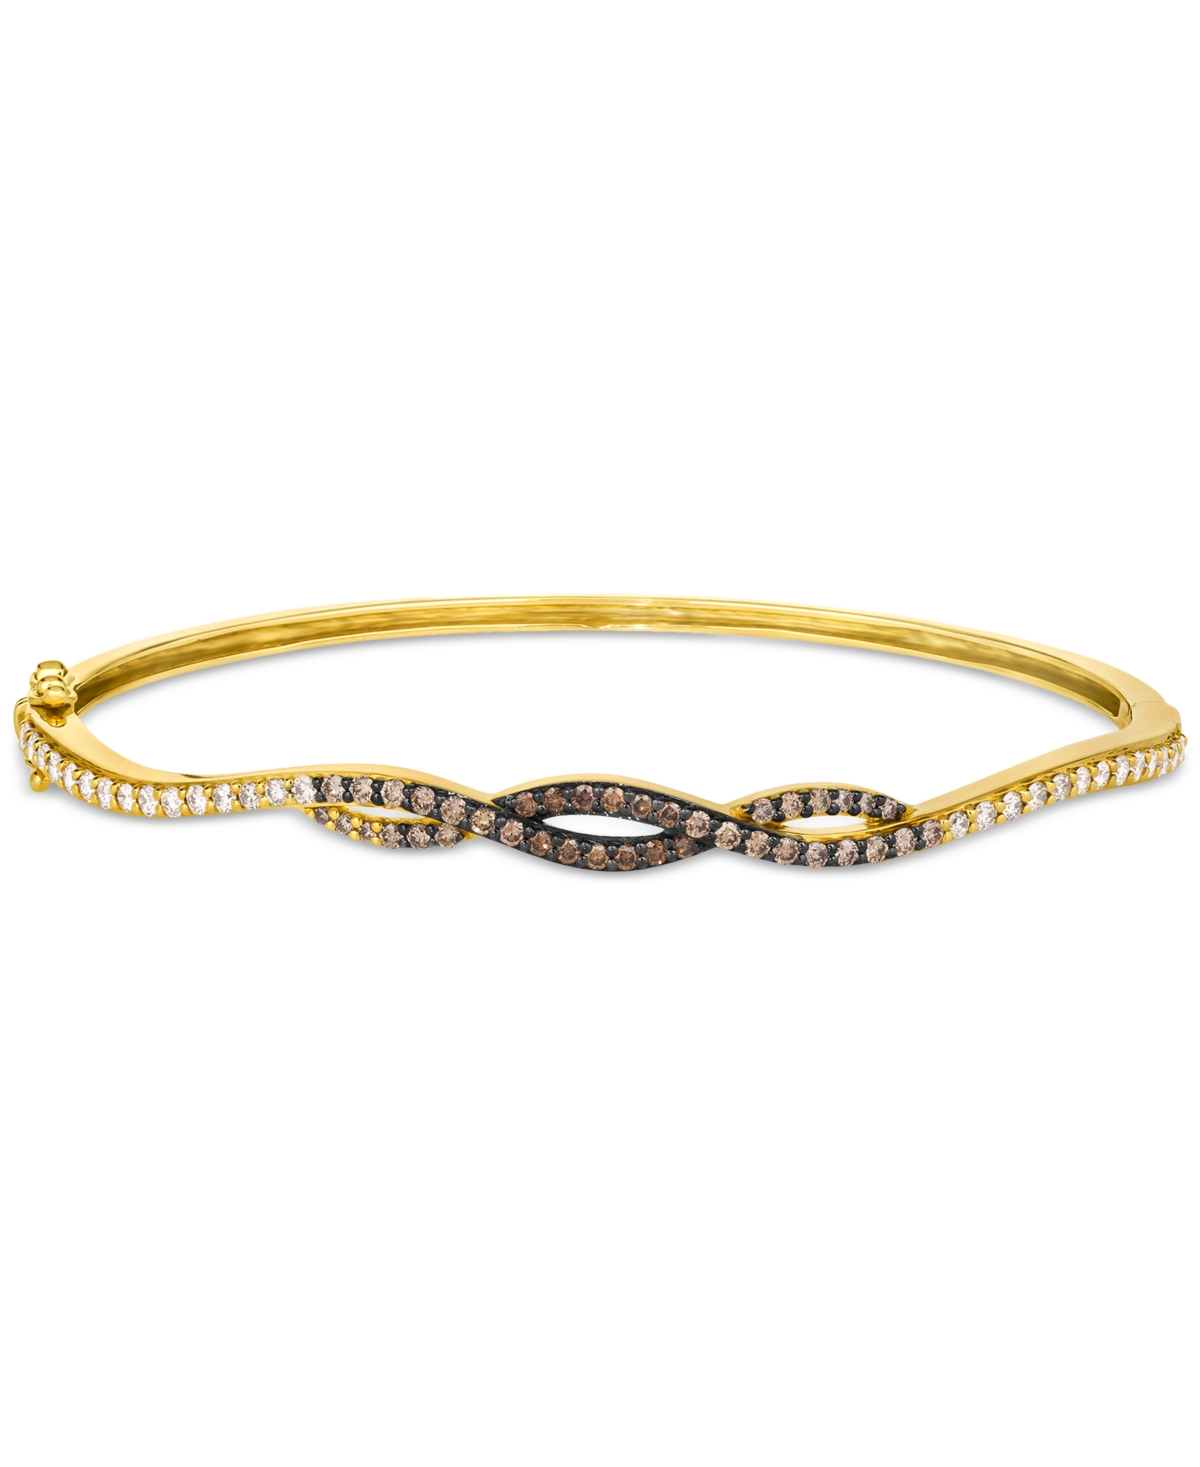 Ombre Chocolate Ombre Diamond Crossover Bangle Bracelet (1 ct. t.w.) in 14k Gold - K Honey Gold Bangle